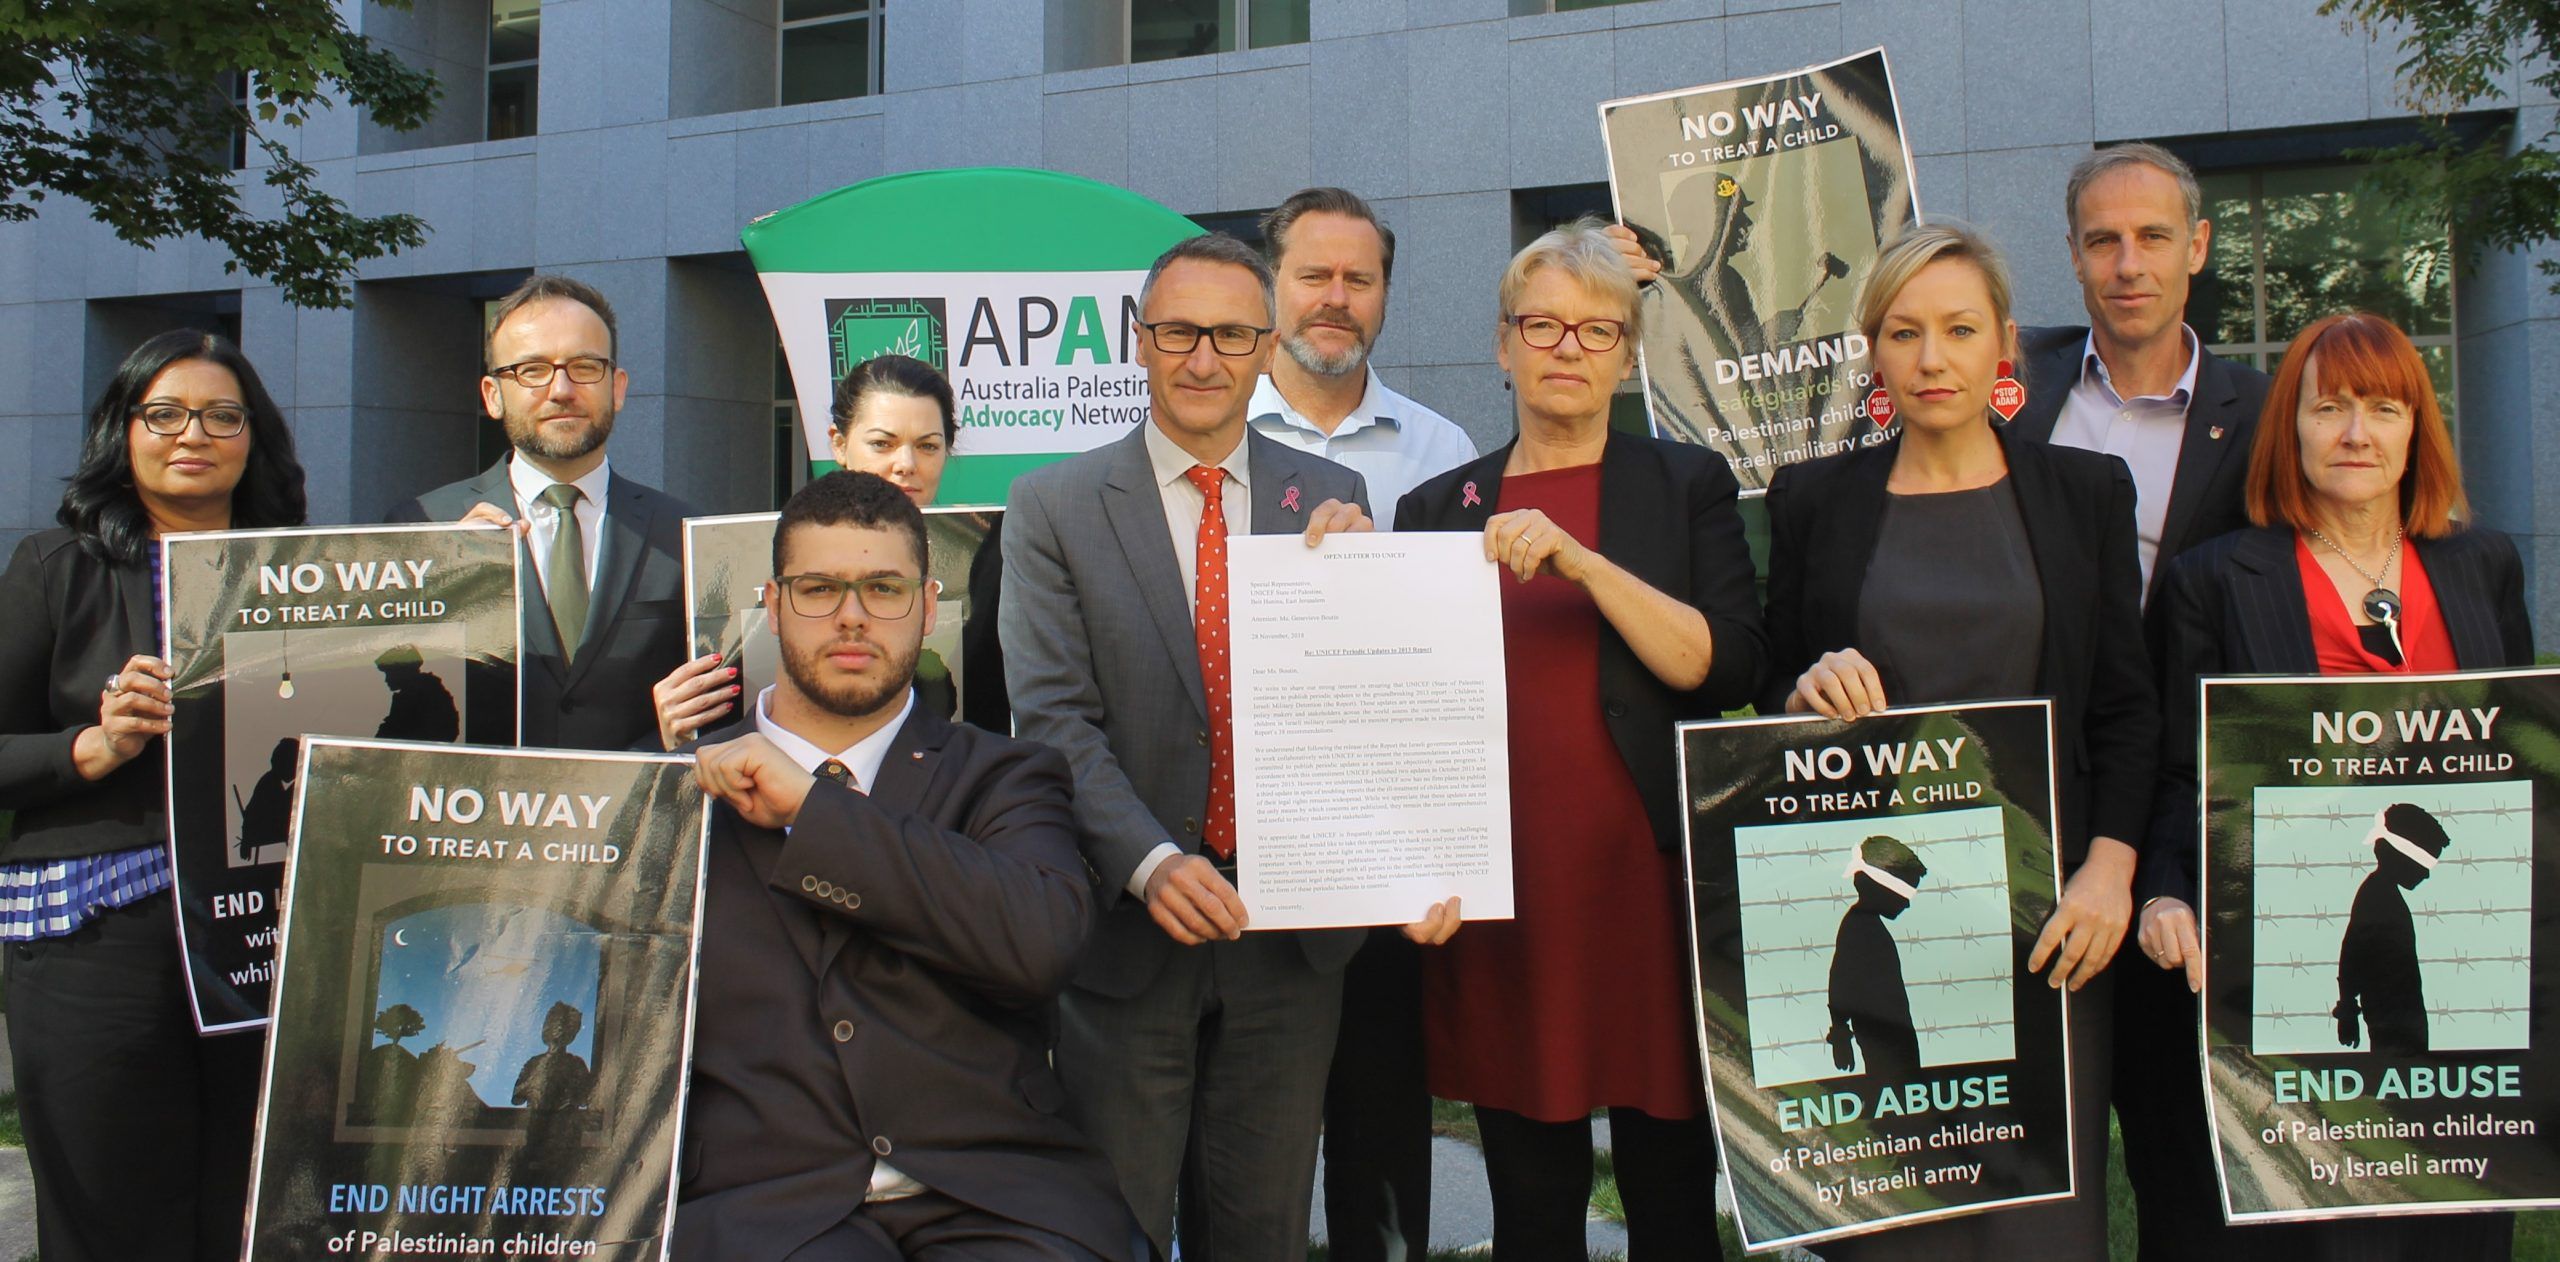 All Greens parliamentarians holding signs 'no way to treat a child'